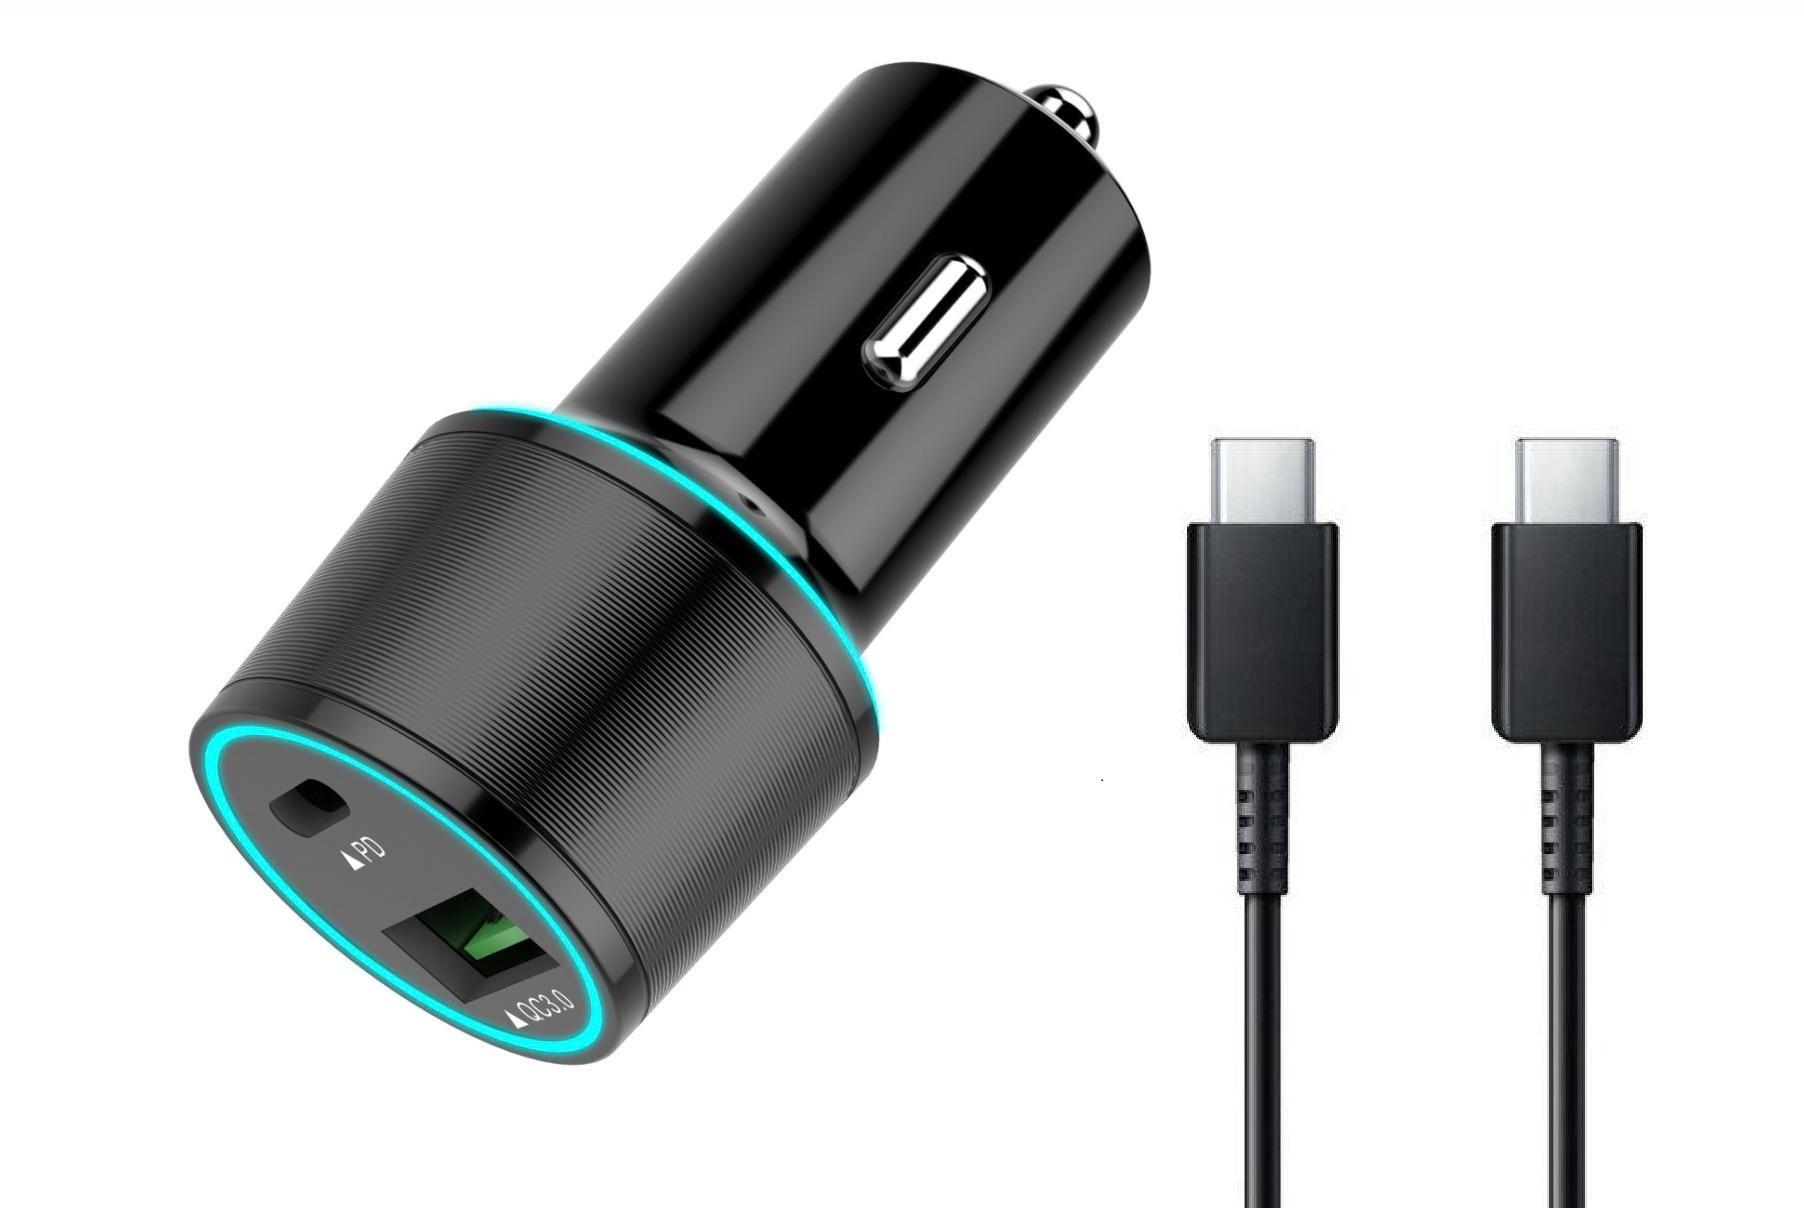 USB C Car Charger UrbanX 20W Car and Truck Charger For LG Q51 with Power Delivery 3.0 Cigarette Lighter USB Charger - Black, Comes with USB C to USB C PD Cable 3.3FT 1M - image 1 of 3